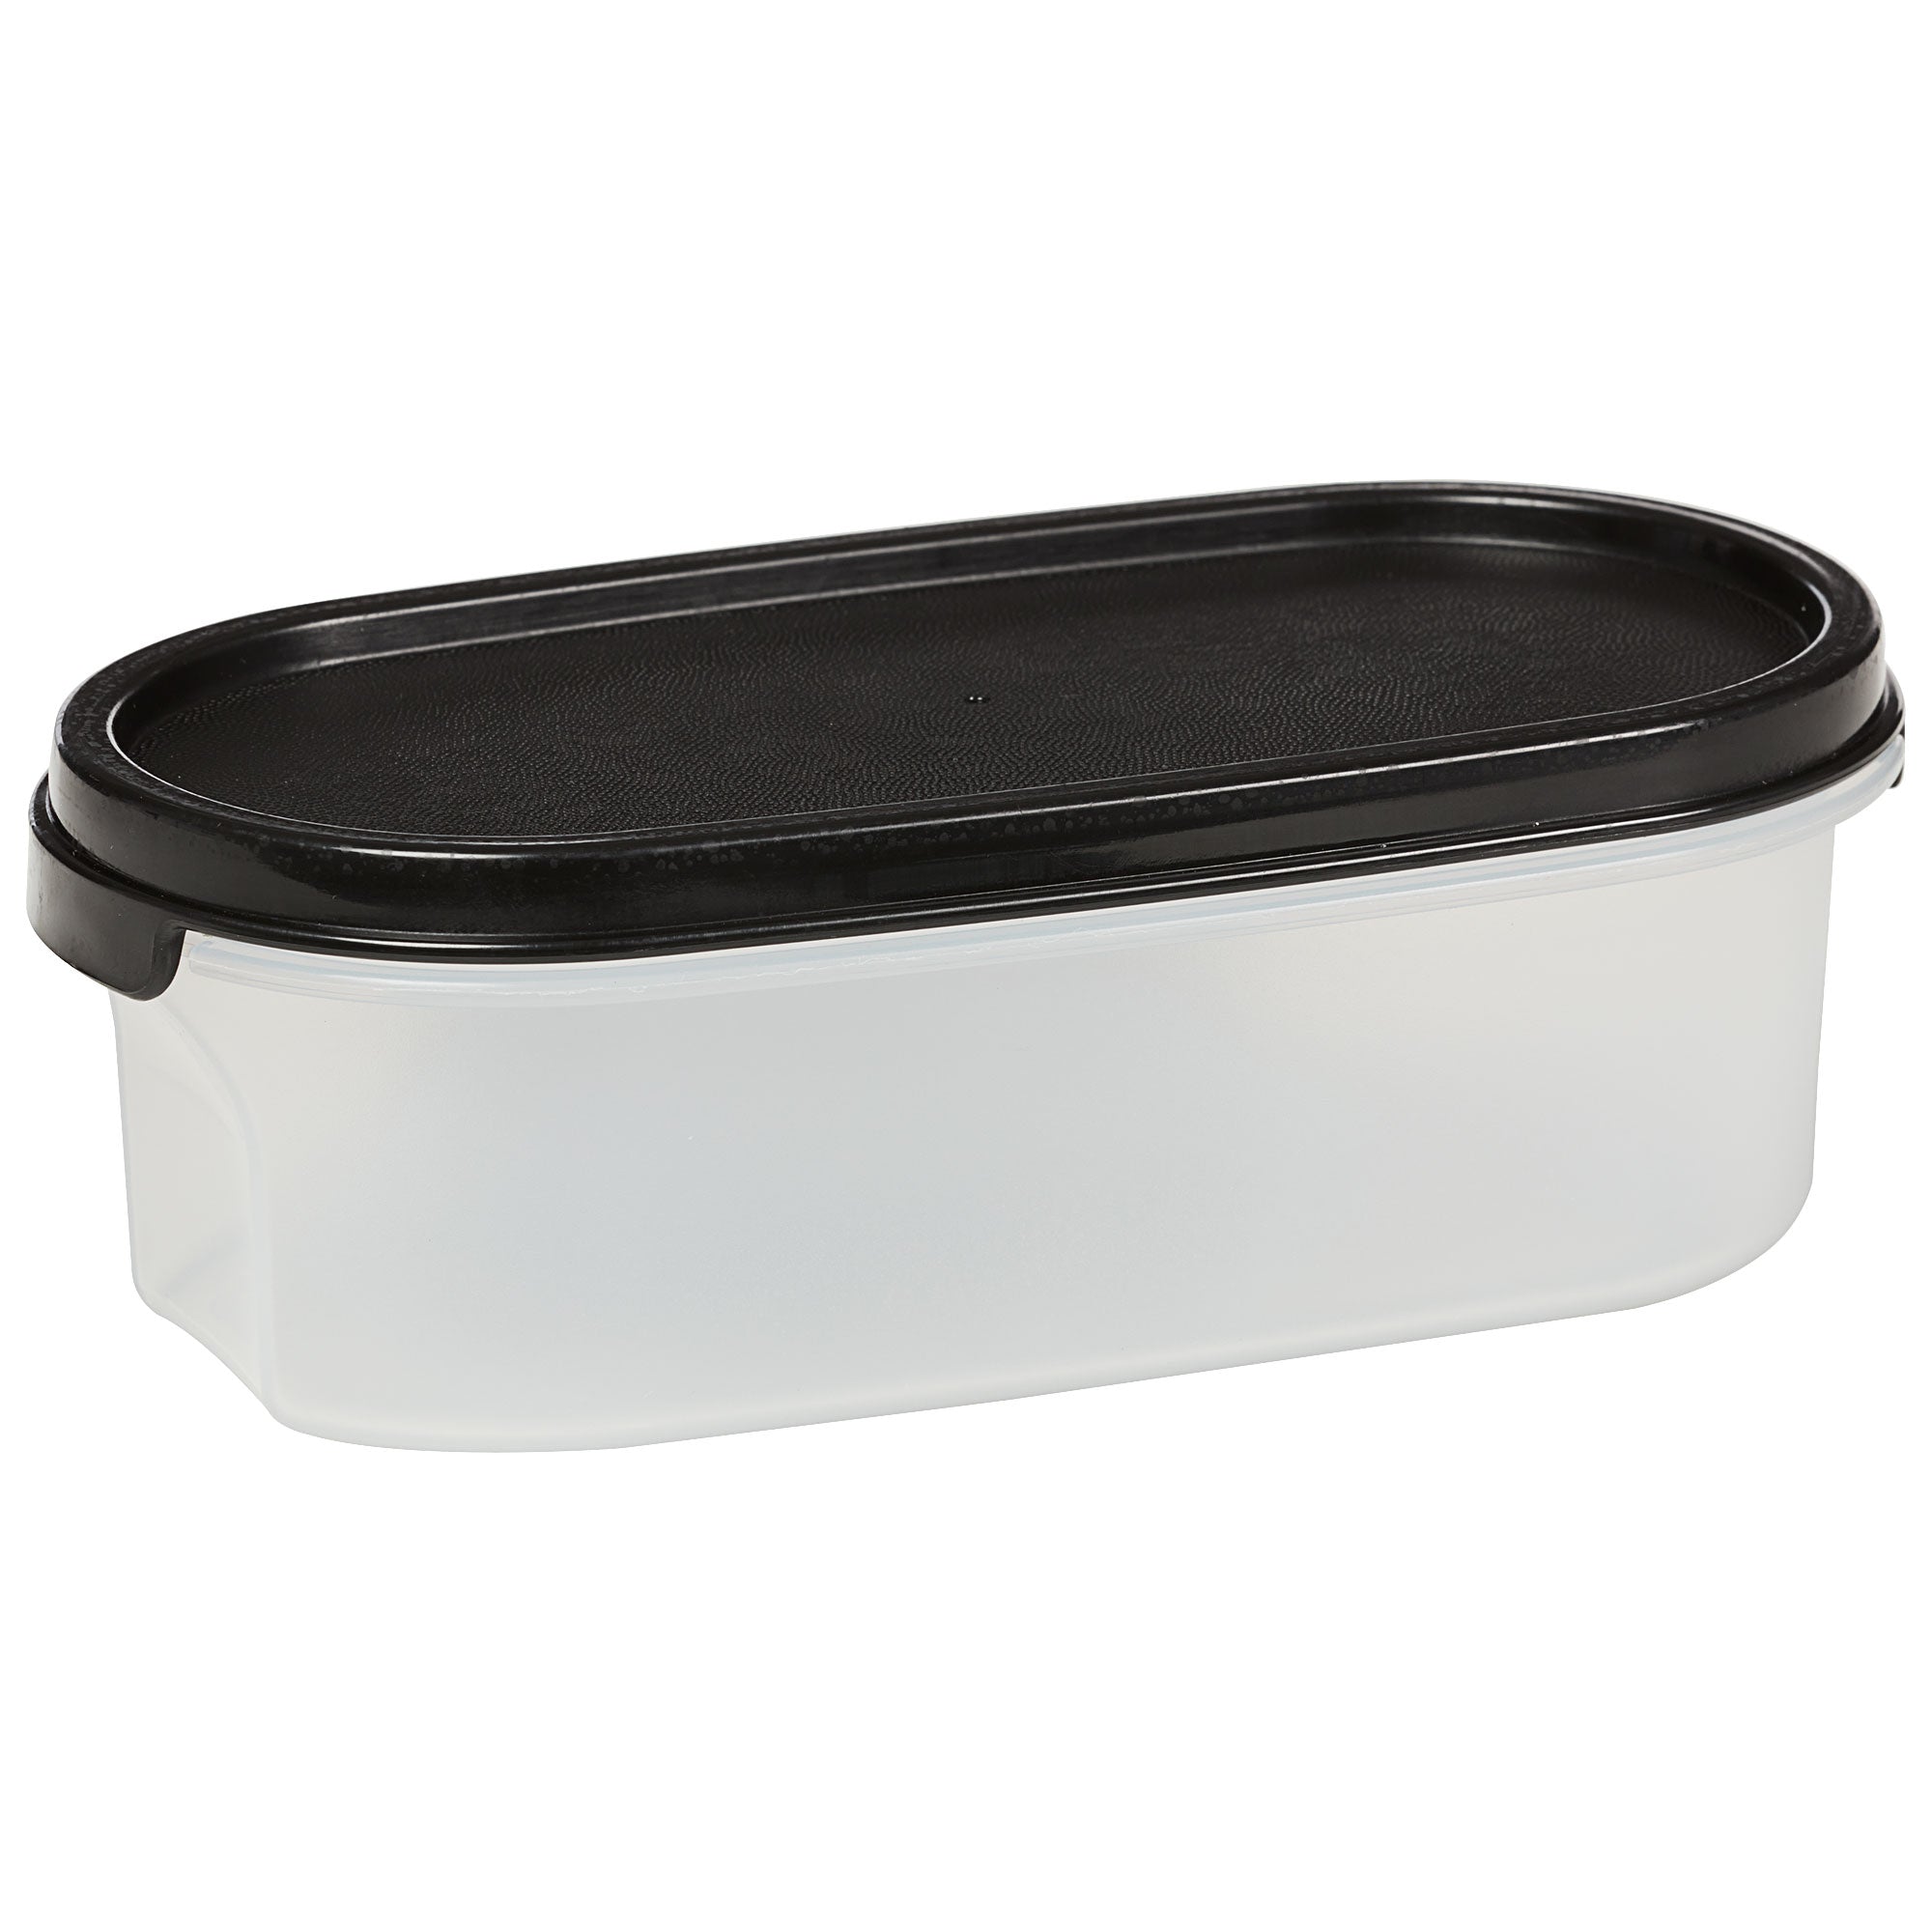  Tupperware Modular Mates OVAL Replacement Seal / Lid ONLY -  BLACK: Home & Kitchen